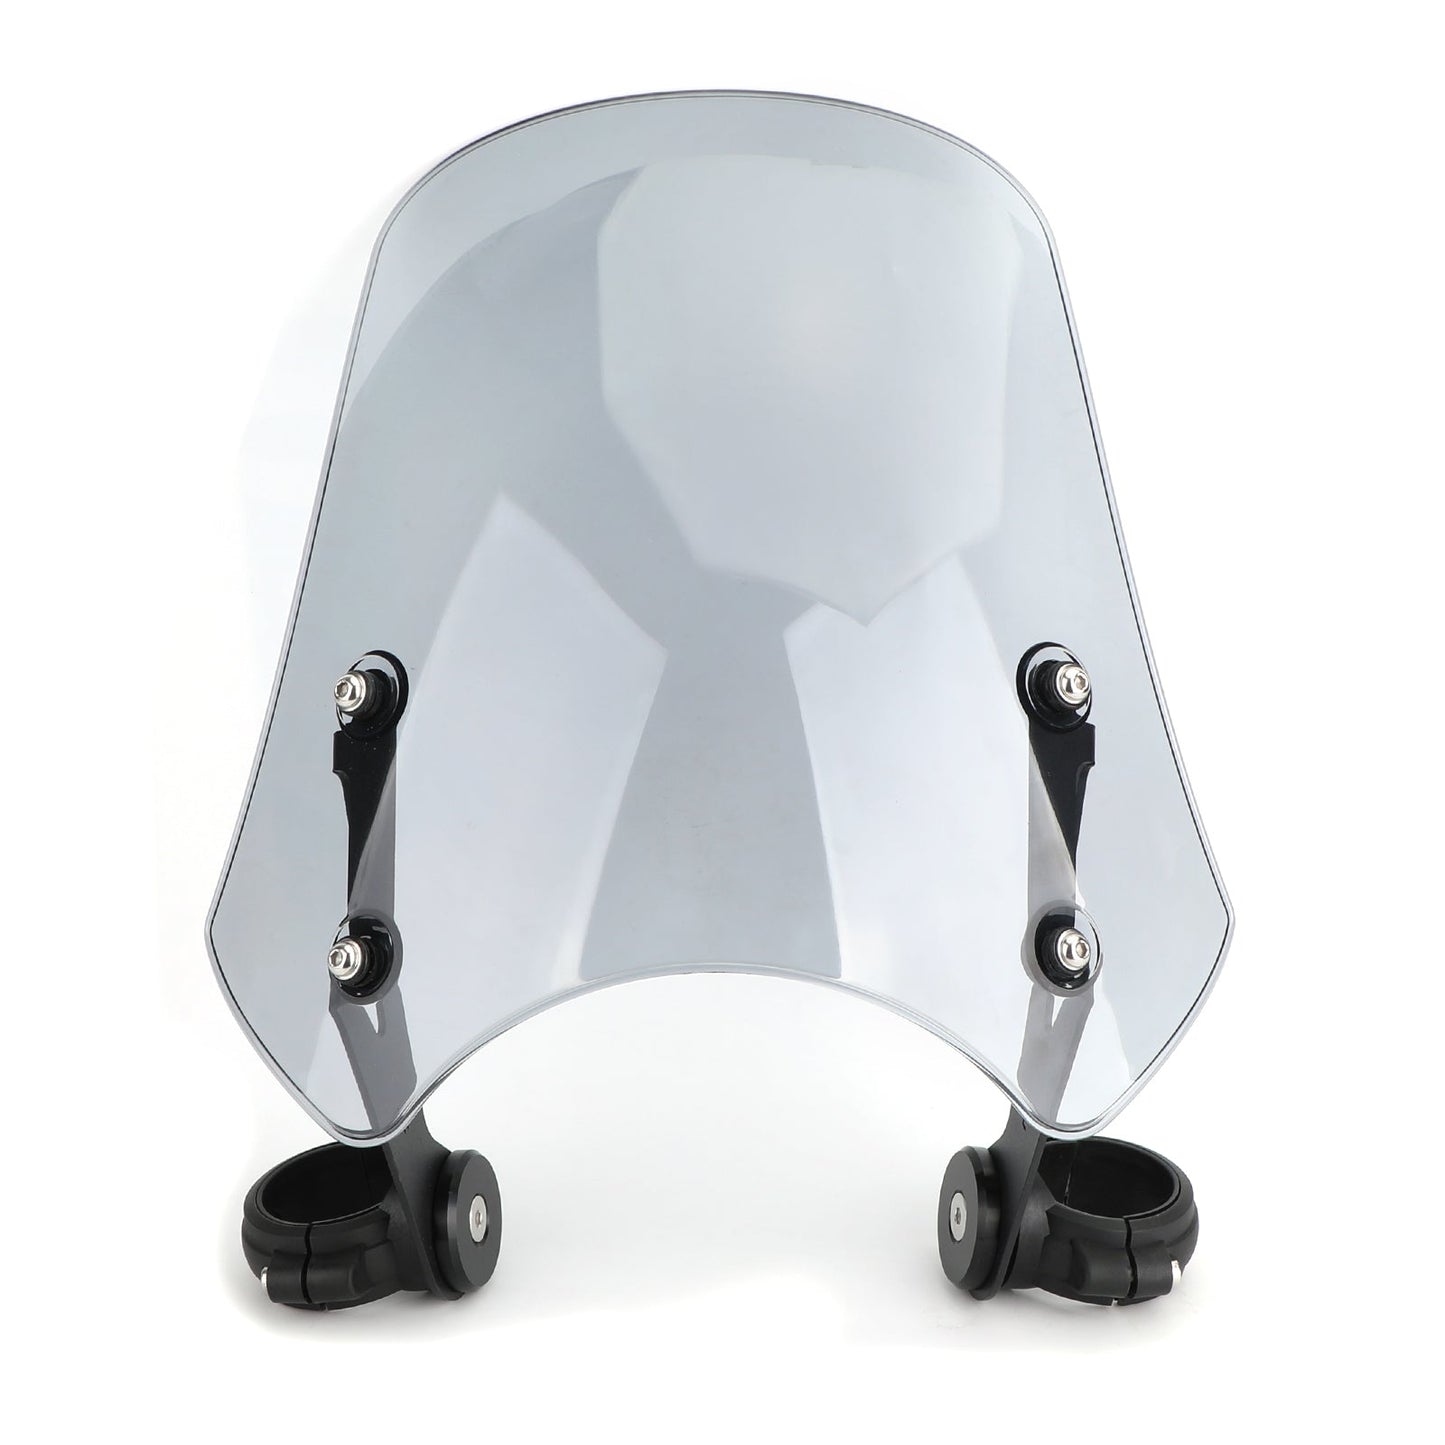 ABS Motorcycle Windscreen Windshield for Harley Dyna Softail Models